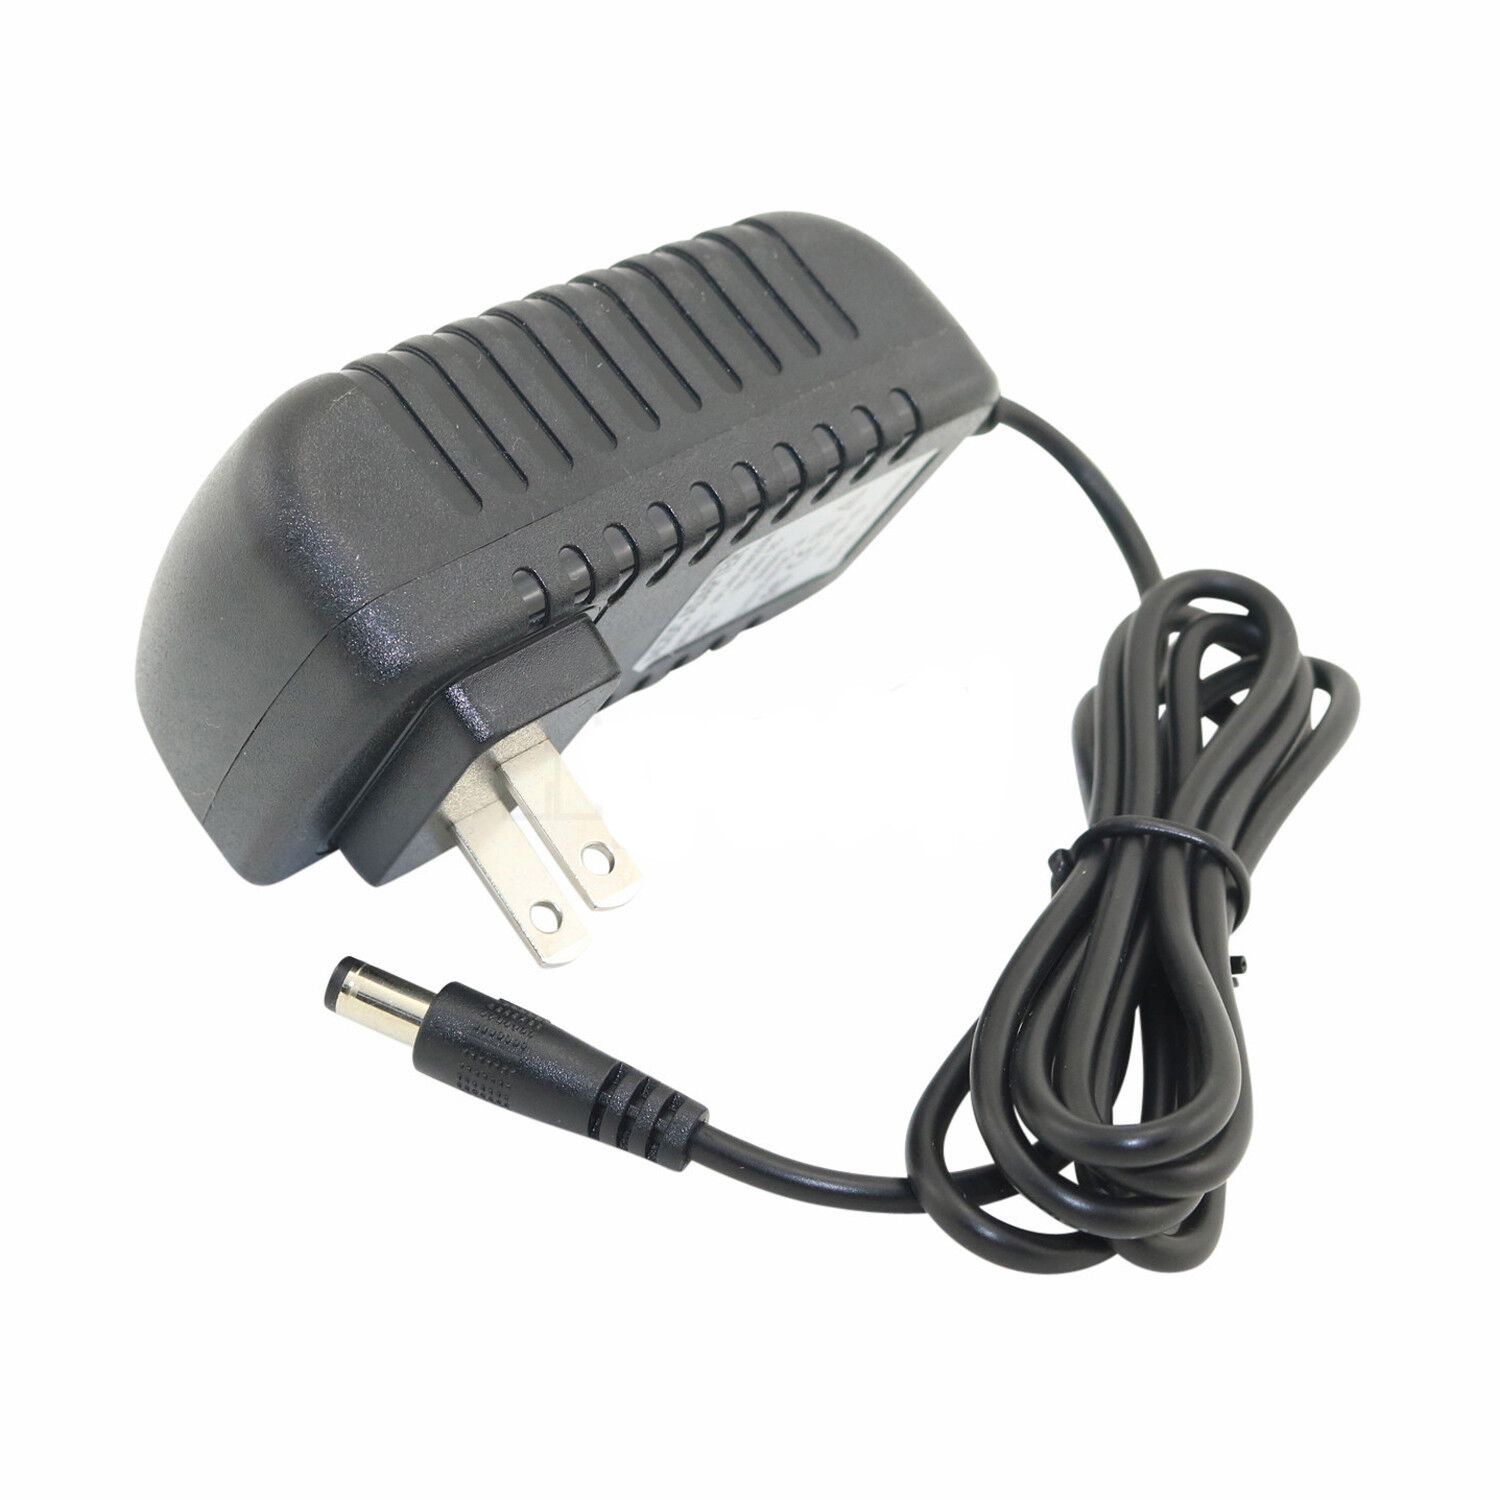 *Brand NEW*(12 Volt, 1500mA, 1.5m Cable) AC Adapter for RS-AB015J00 Power Supply - Click Image to Close